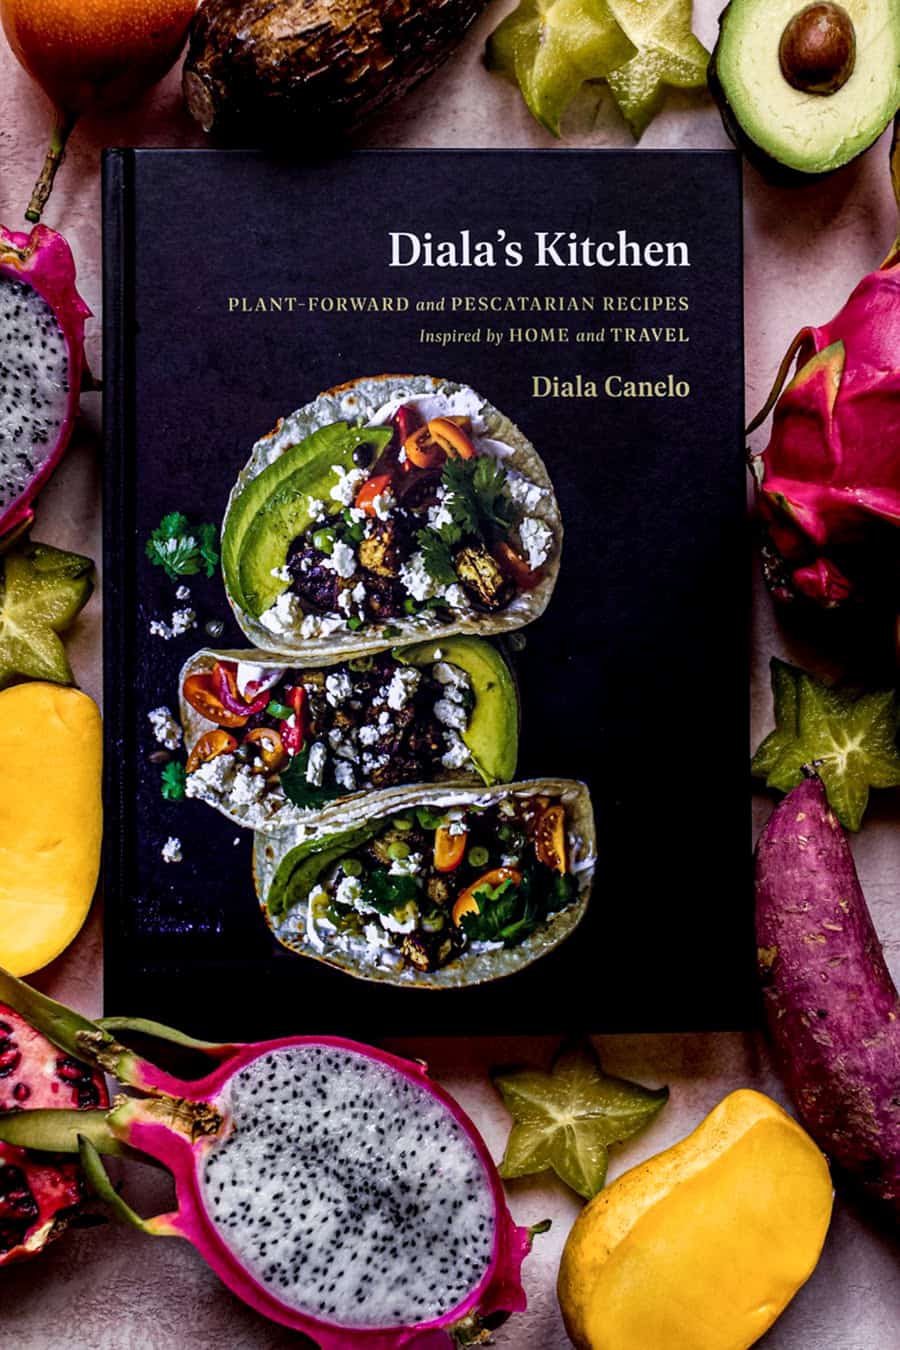 The Diala's kitchen cookbooks is out for pre-order!!